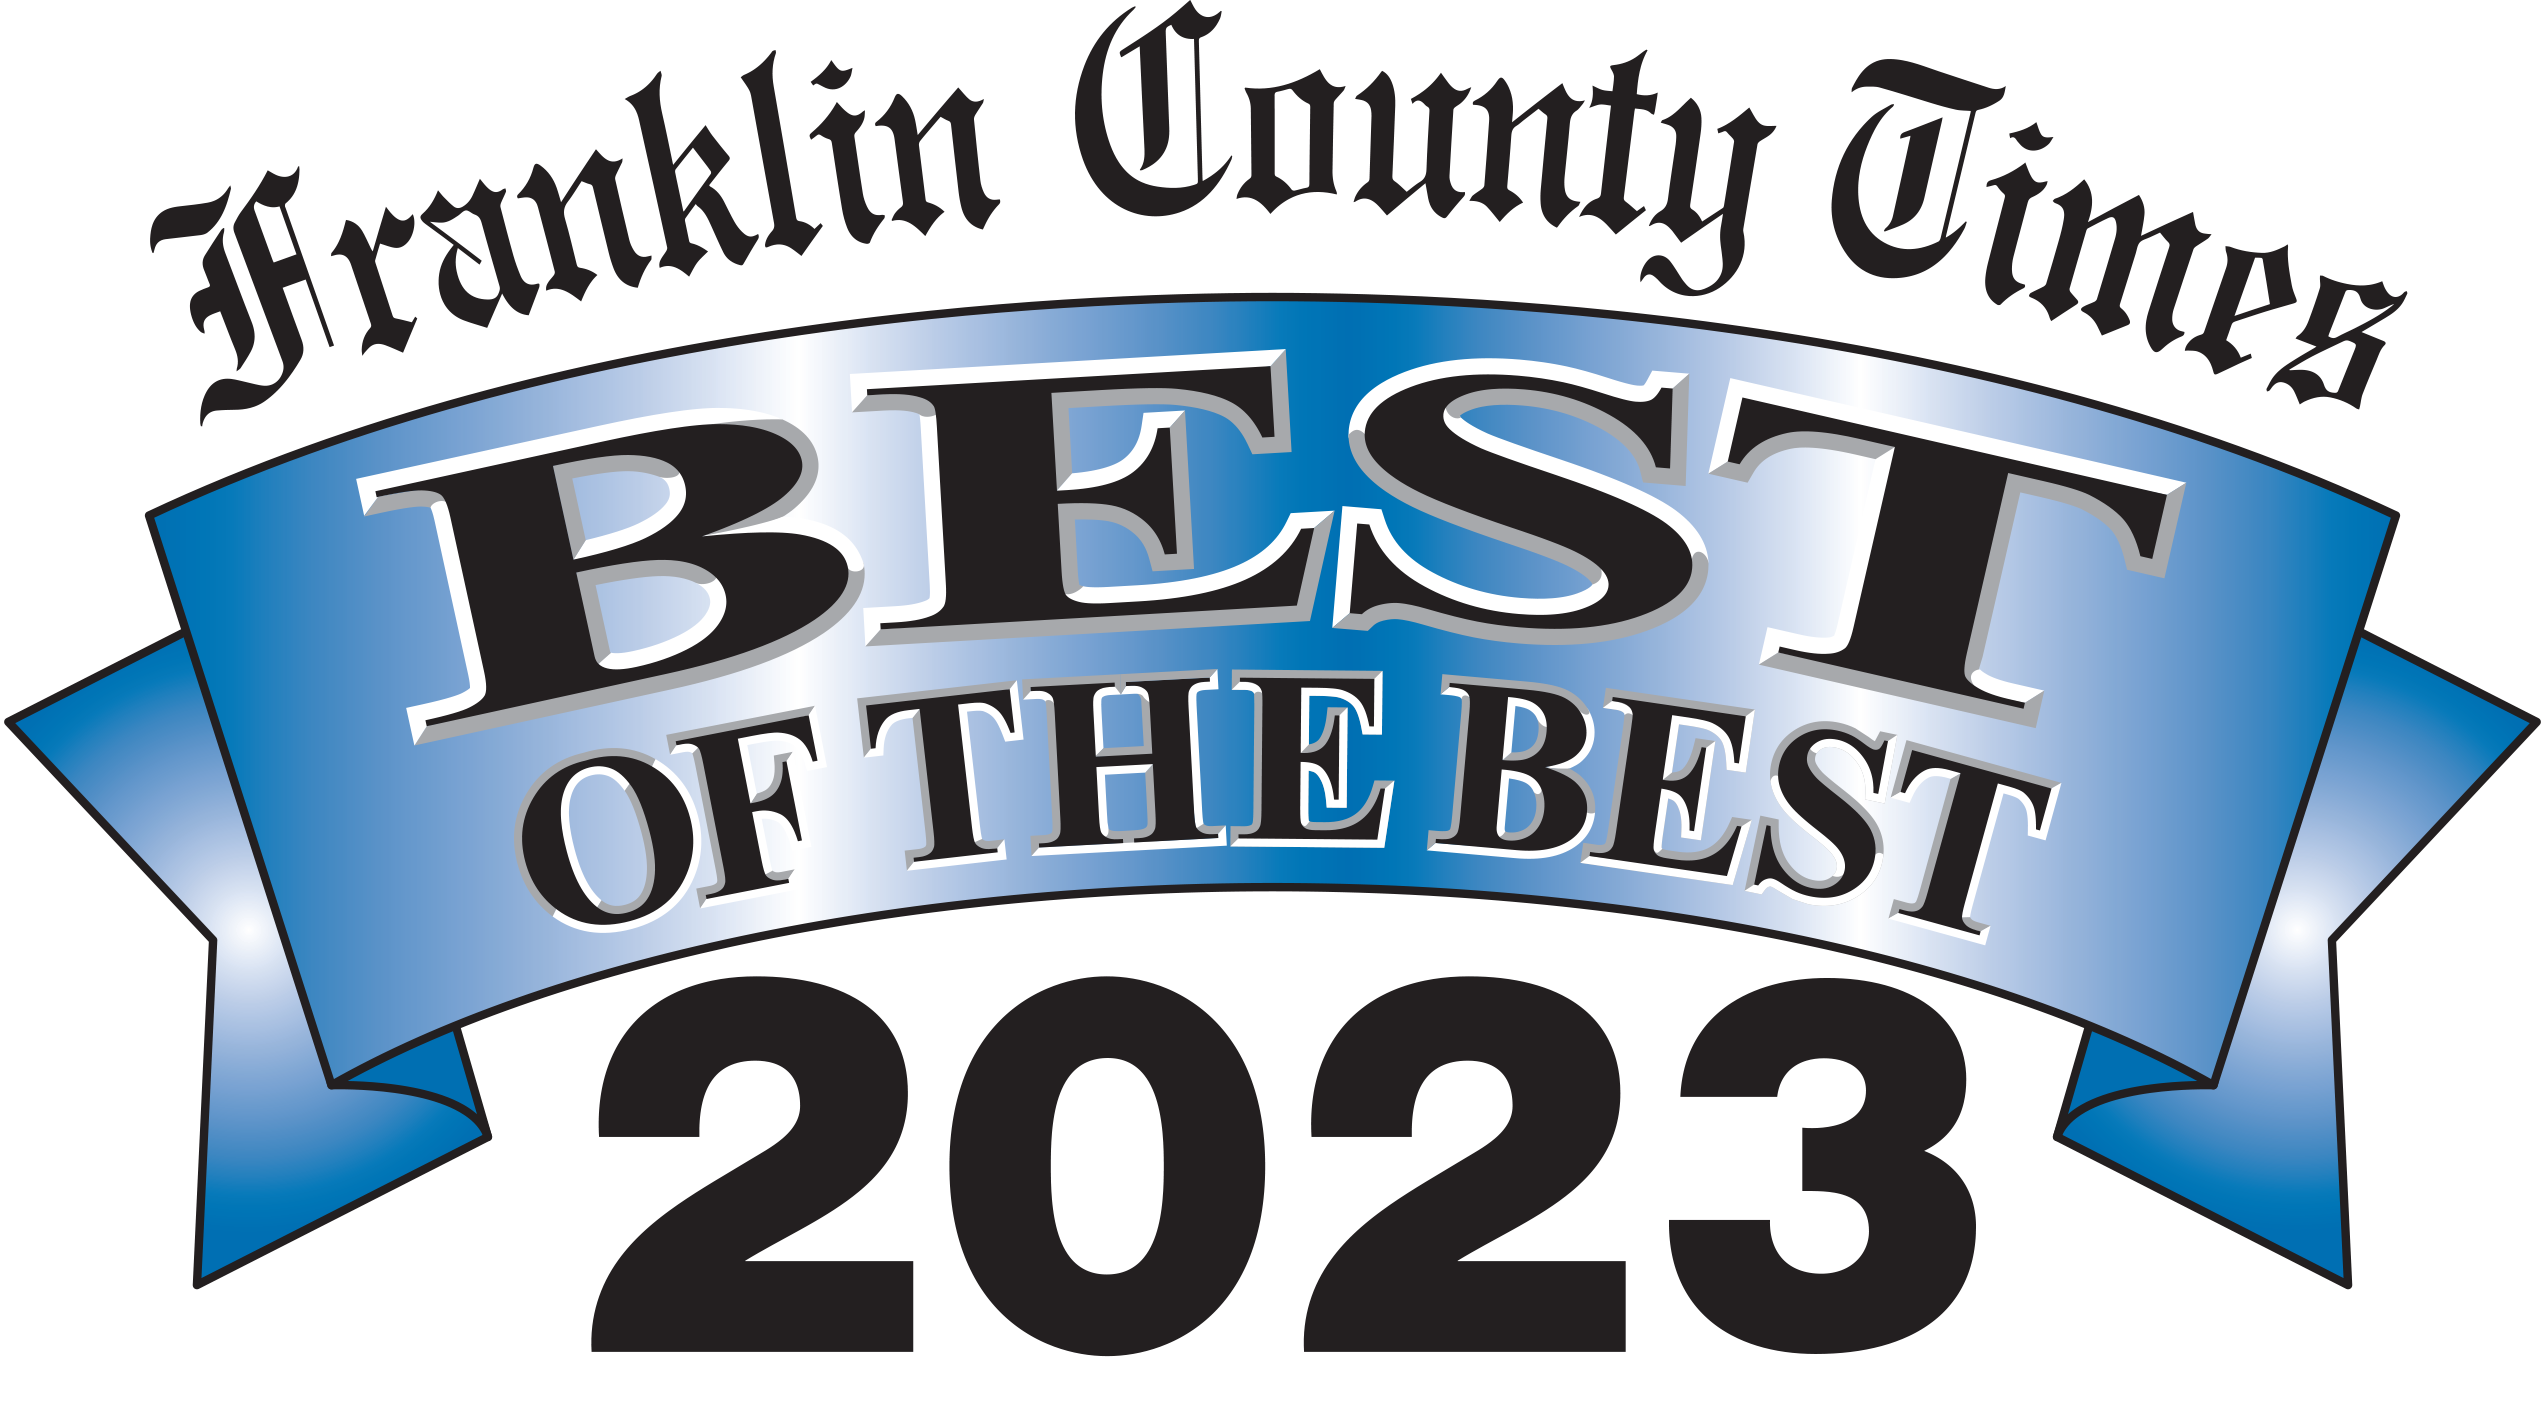 Franklin County Times 2023 Best of the Best Logo